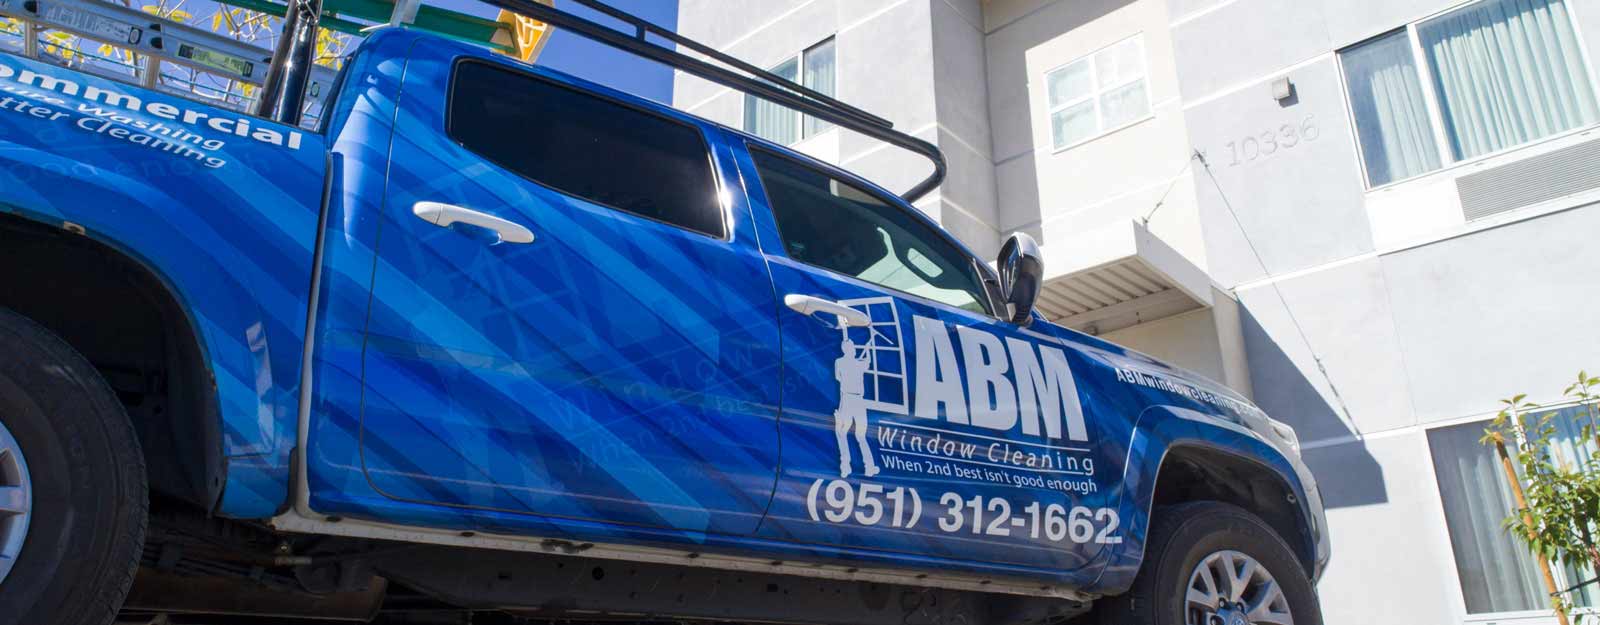 About ABM Window Cleaning